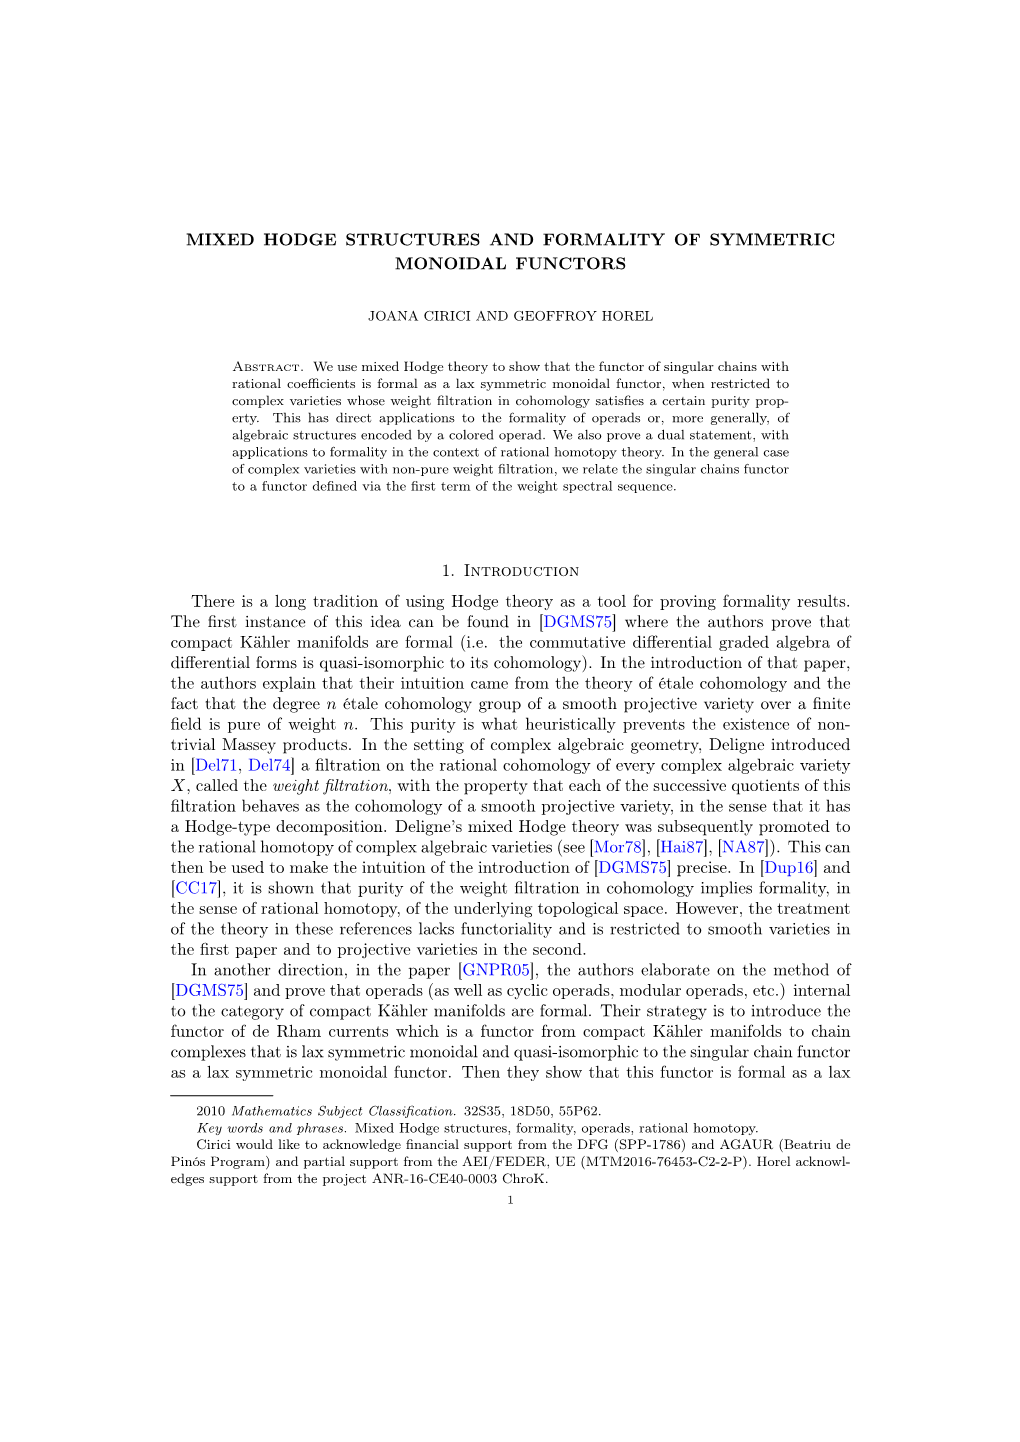 Mixed Hodge Structures and Formality of Symmetric Monoidal Functors